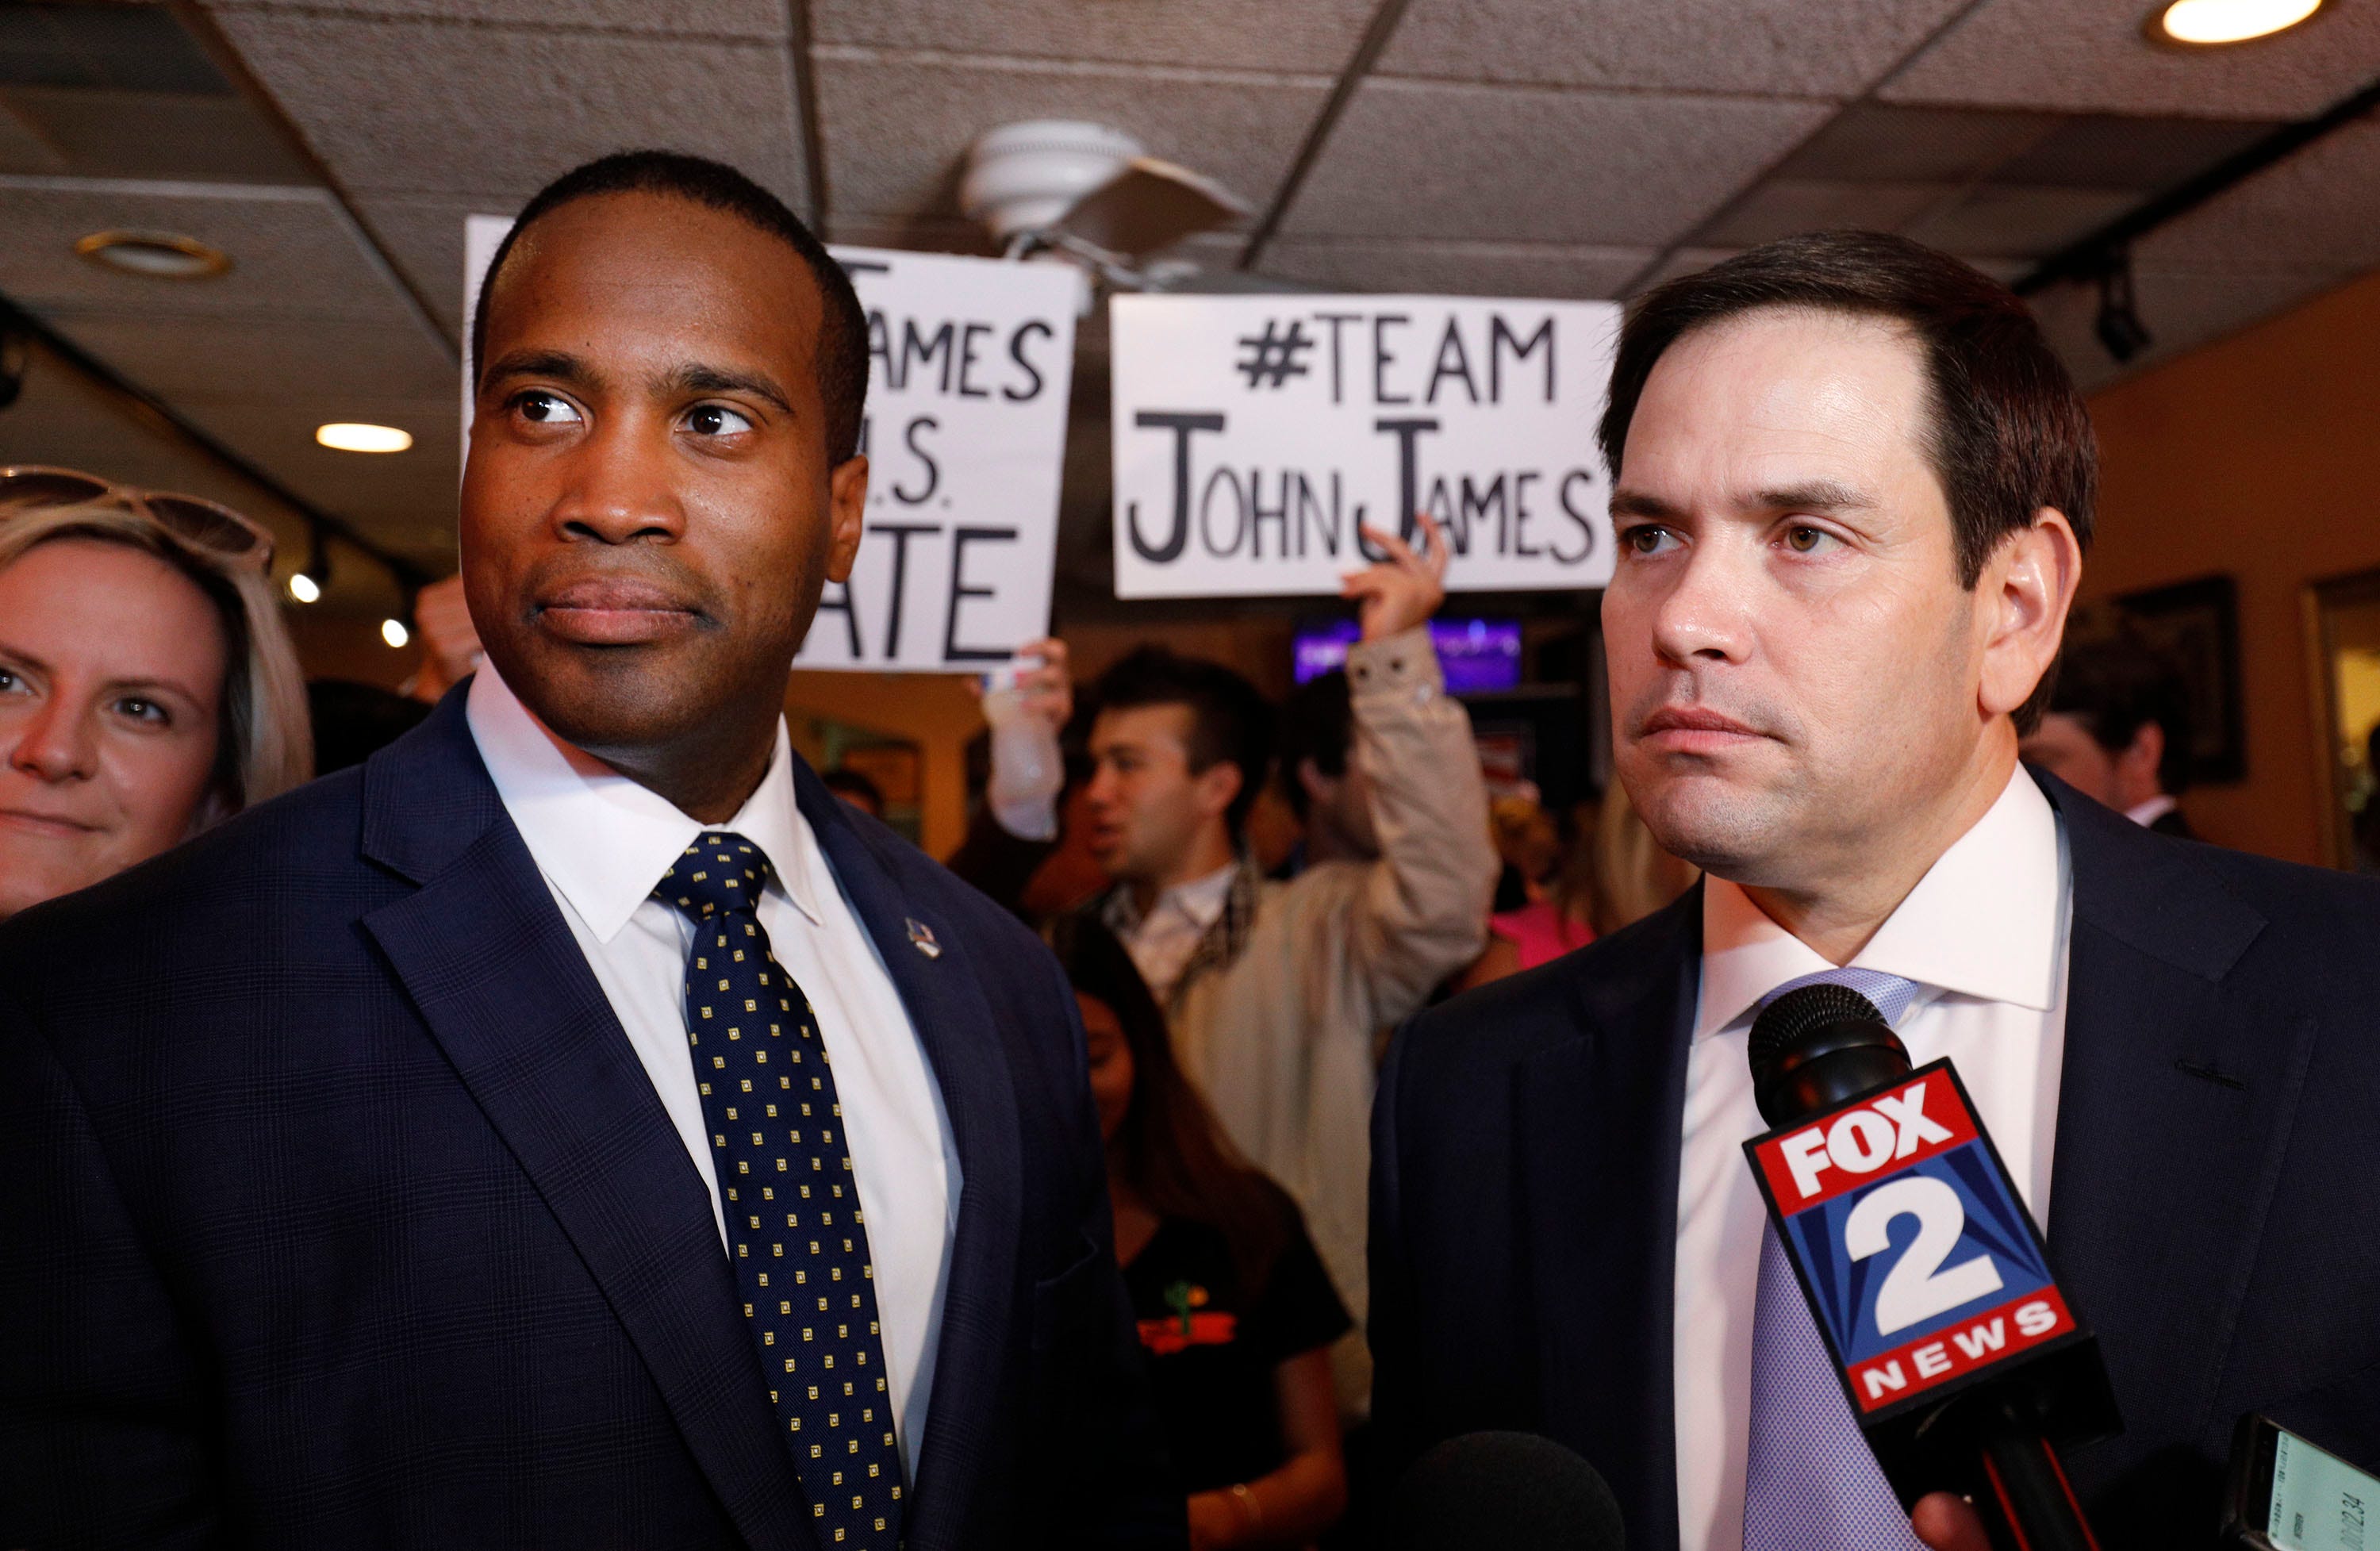 Michigan GOP U.S. Senate candidate John James, left, campaigns with the help of Sen. Marco Rubio (R-Florida), right, at Senor Lopez Restaurant Monday in Detroit.